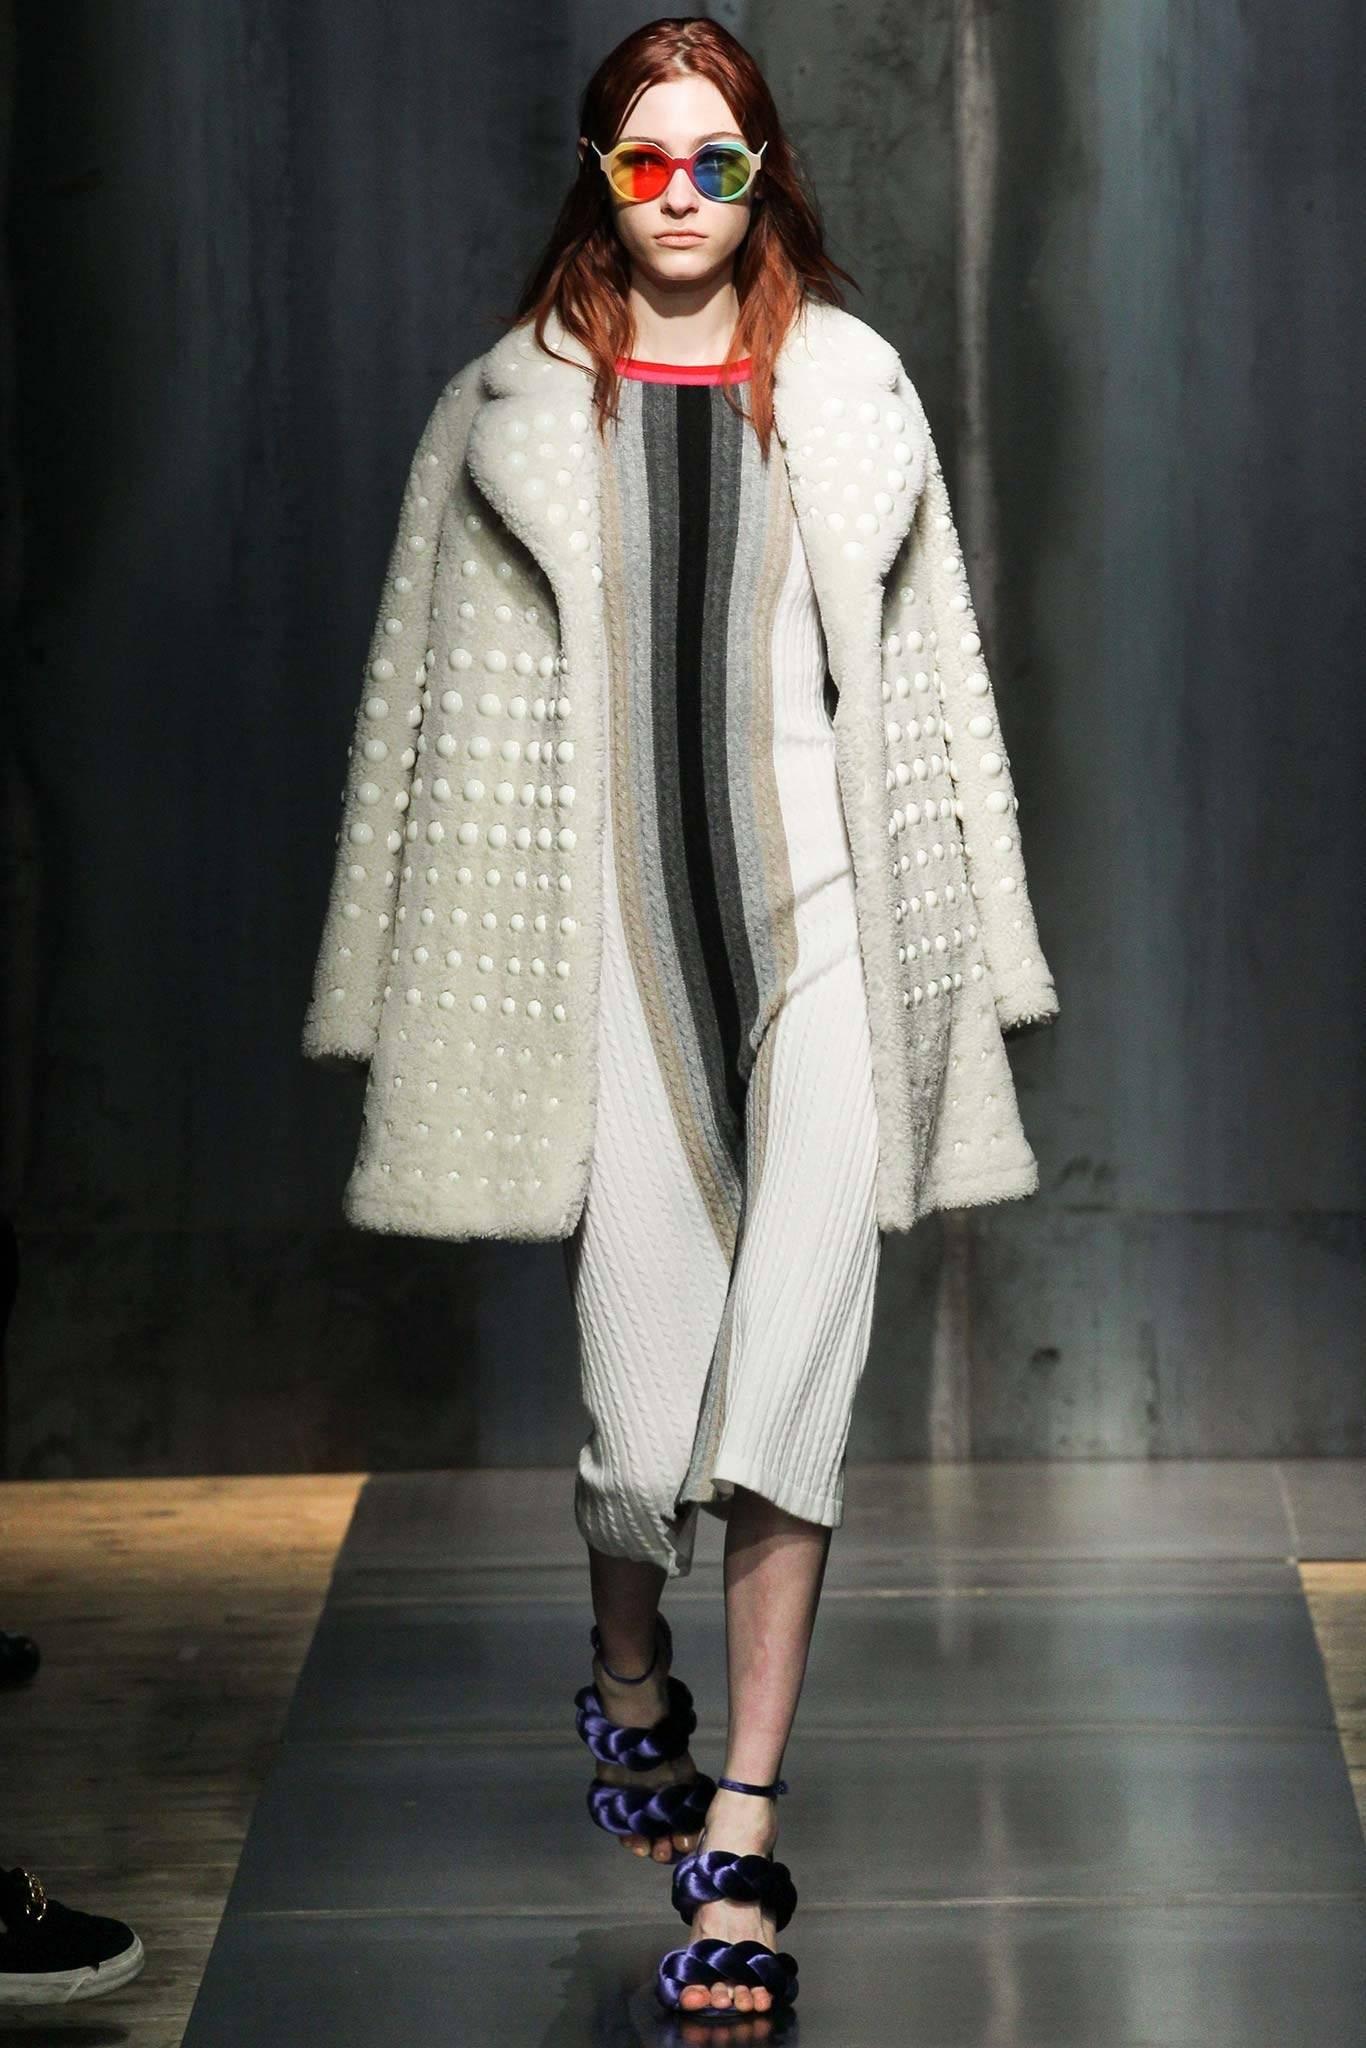 Marco di Vincenzo fall 2015 runway collection ivory shearling coat with plastic 'bubbles'. Original retail price tag included inside pocket $9530+. Tagged size FR 36 (USA 4). Garment measures 38